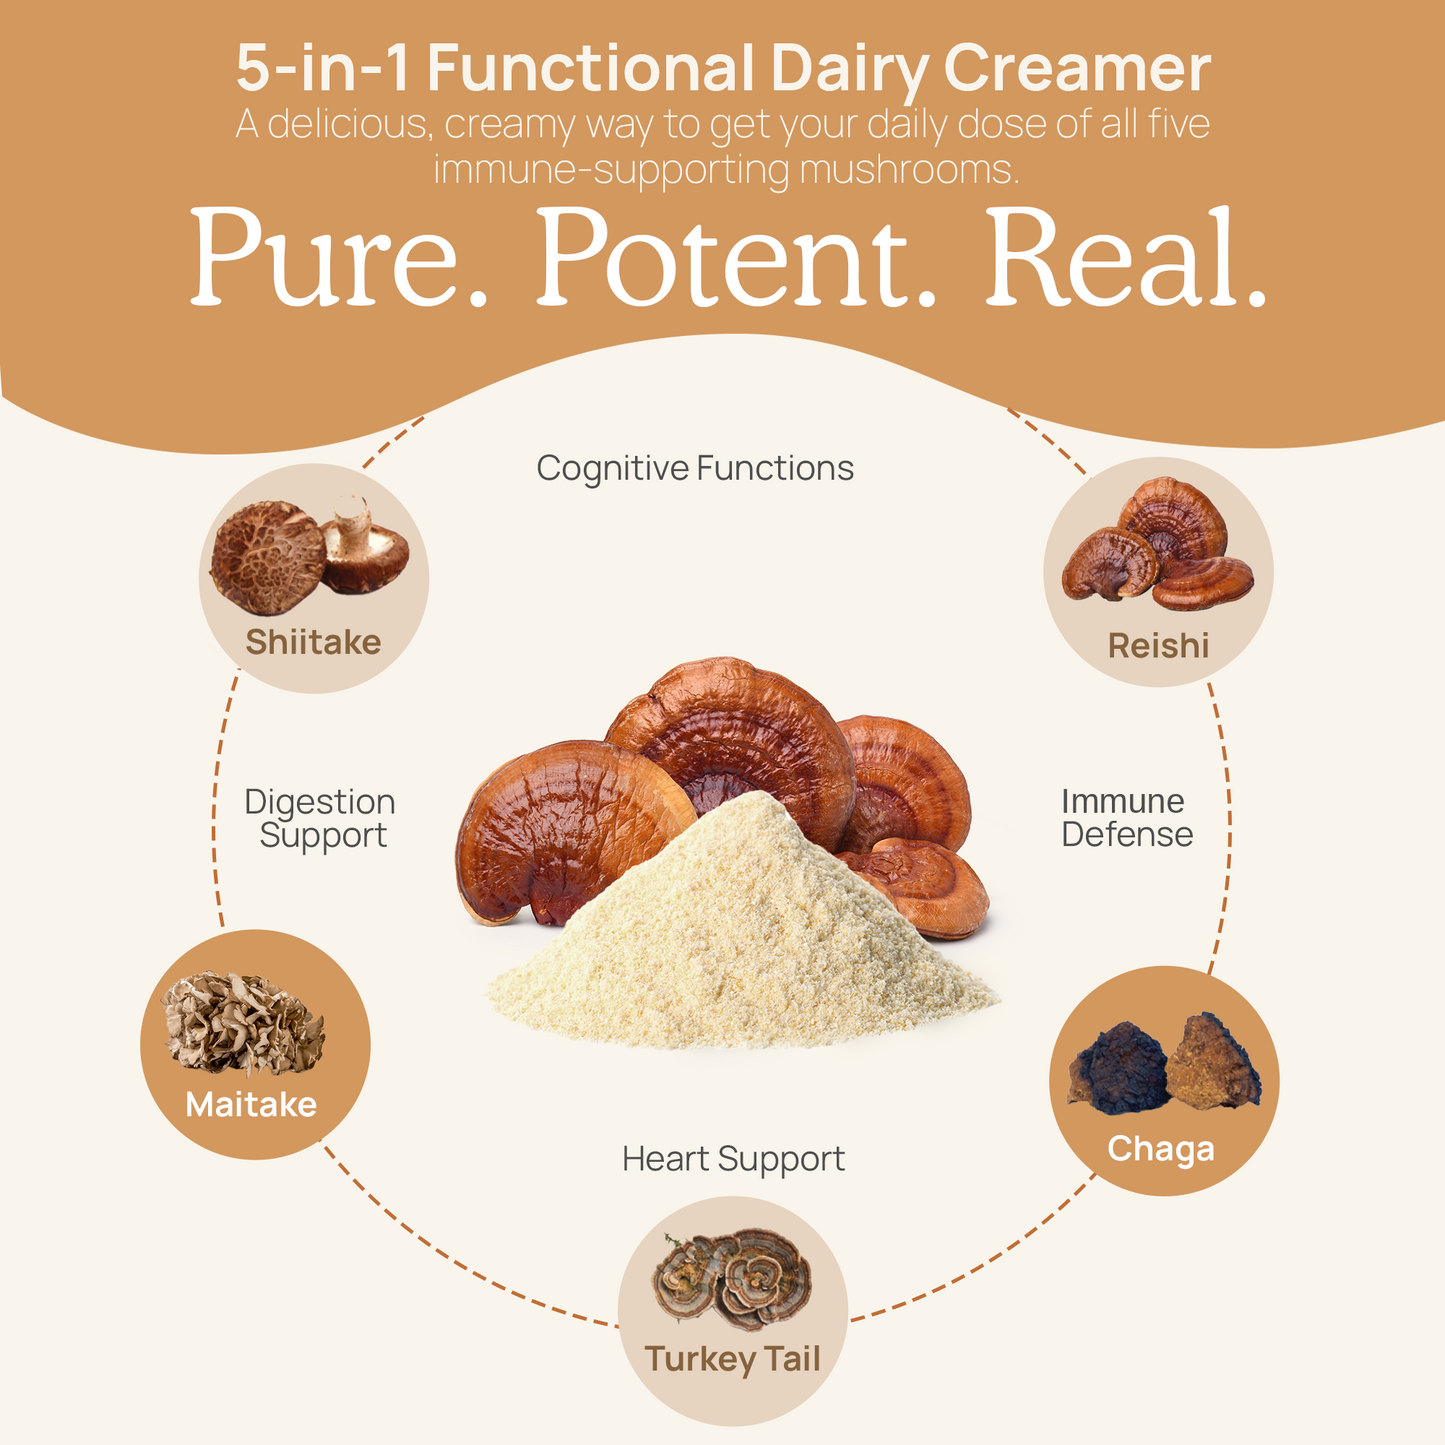 Illustration of Real Mushrooms 5-in-1 Functional Dairy Creamer Powder with USDA Certified Organic mushrooms, highlighting health benefits like cognitive support from lion's mane and immune defense from reishi.